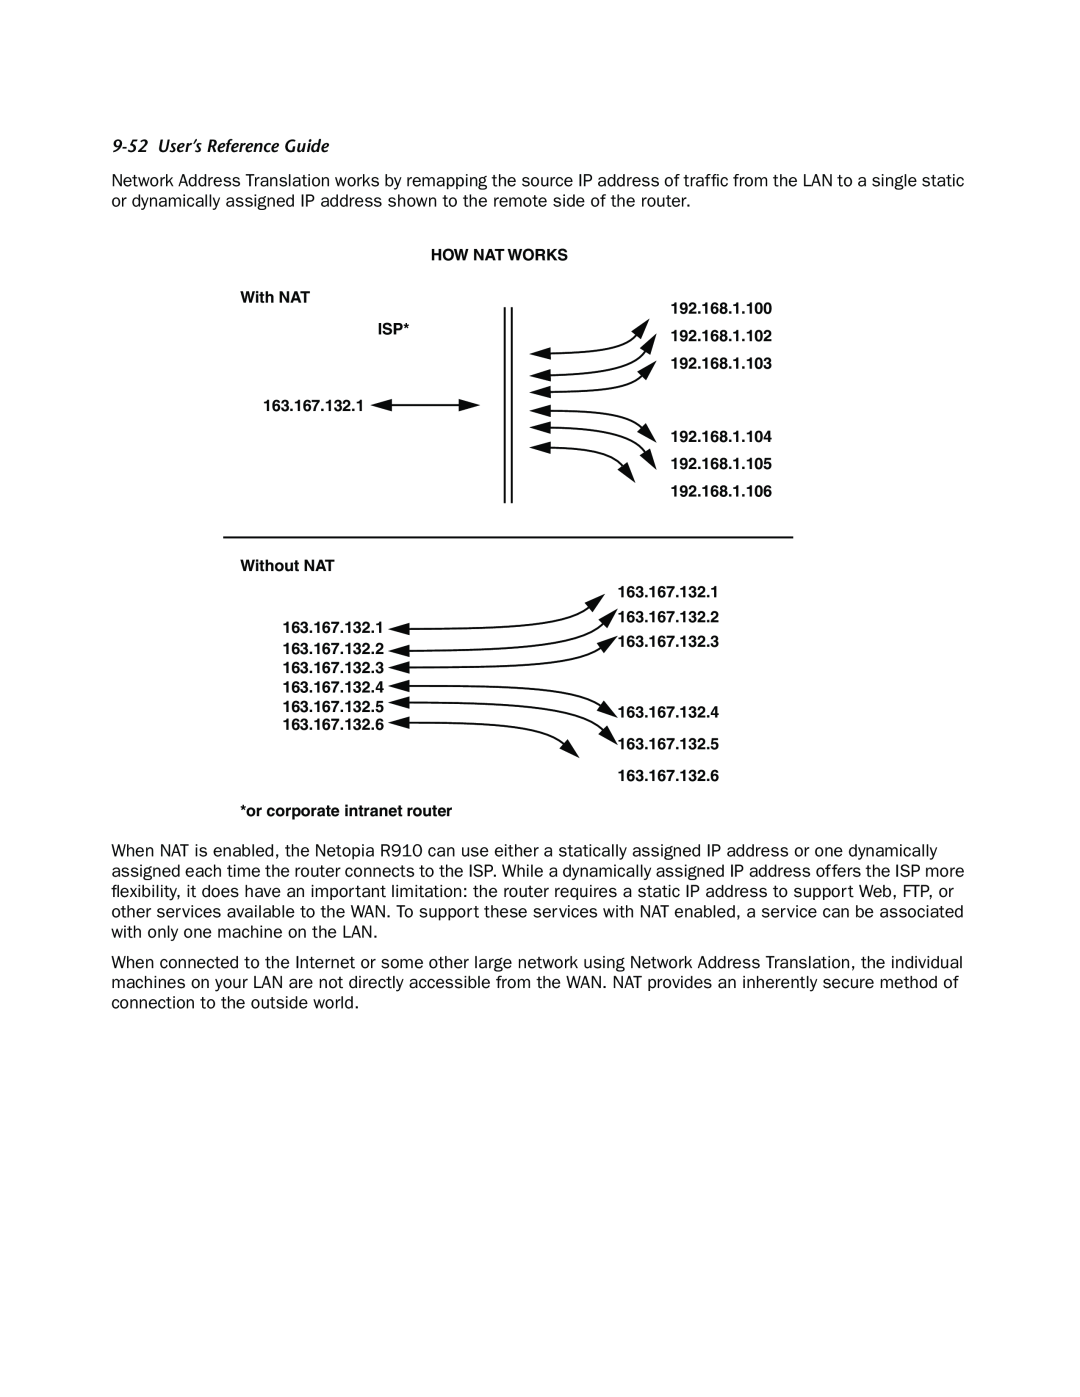 Netopia R910 User’s Reference Guide, HOW NAT WORKS With NAT ISP 163.167.132.1 Without NAT, or corporate intranet router 